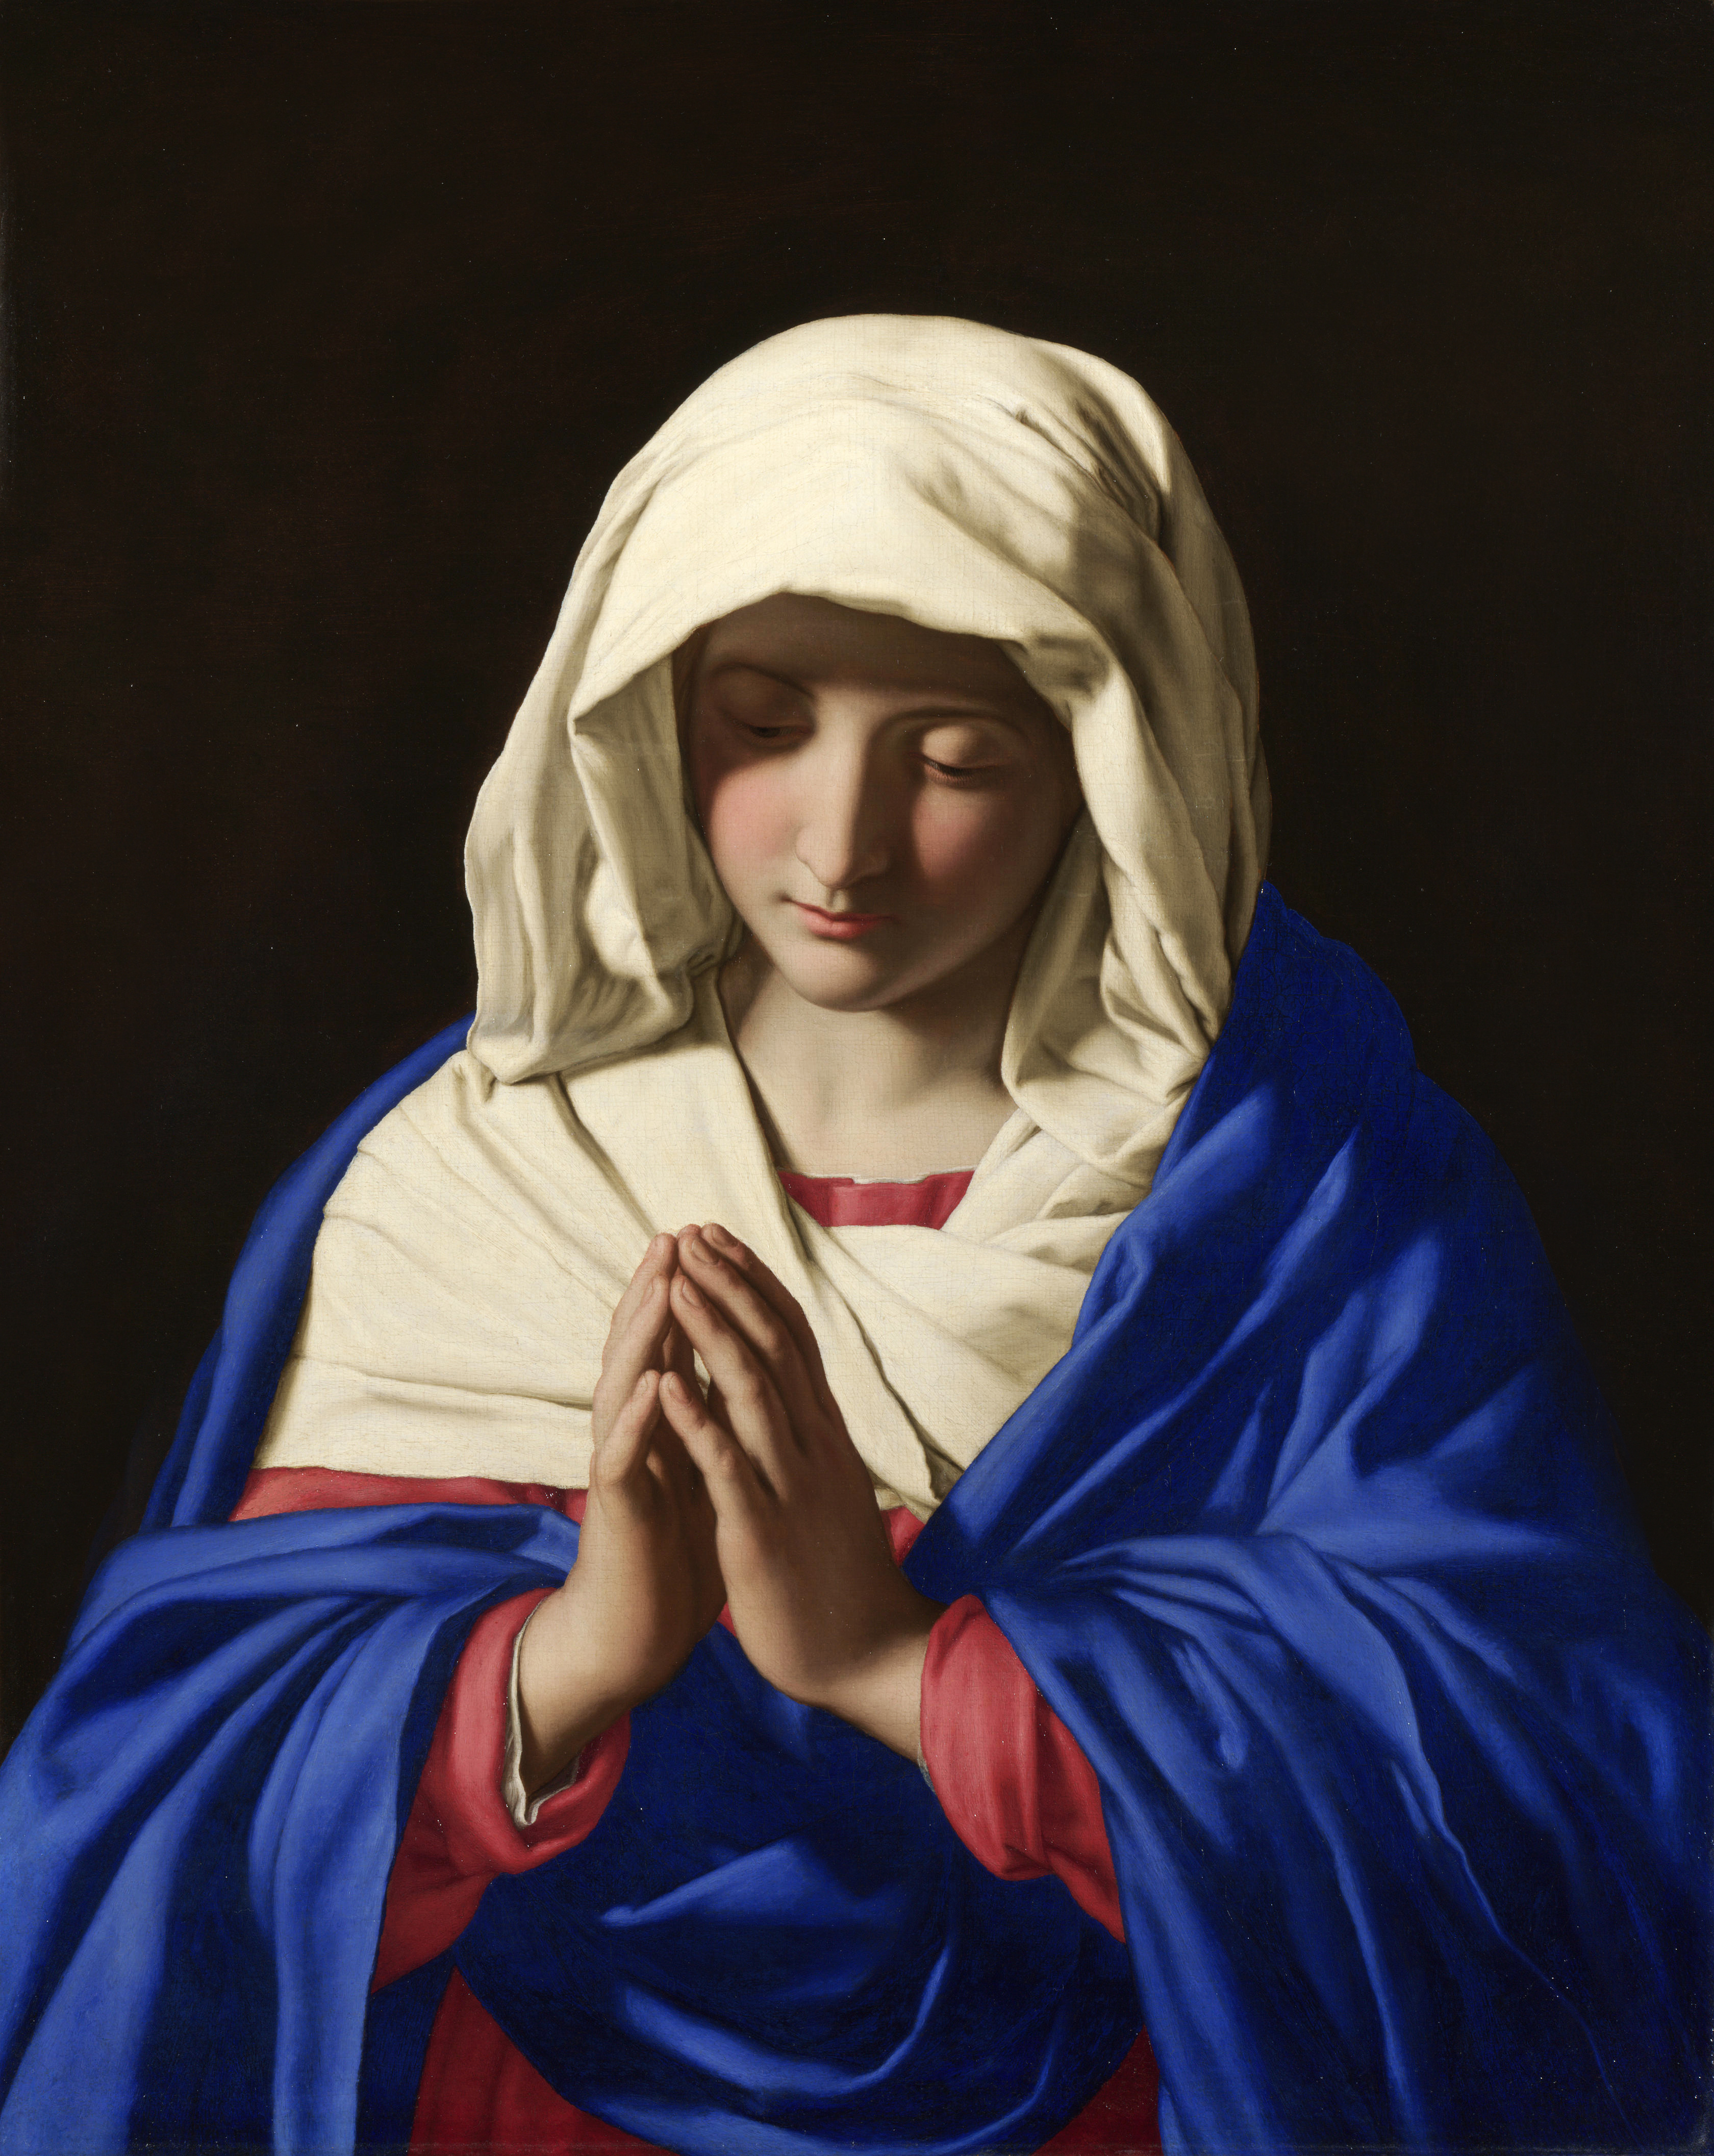 Full title: The Virgin in Prayer Artist: Sassoferrato Date made: 1640-50 Source: http://www.nationalgalleryimages.co.uk/ Contact: picture.library@nationalgallery.co.uk Copyright © The National Gallery, London